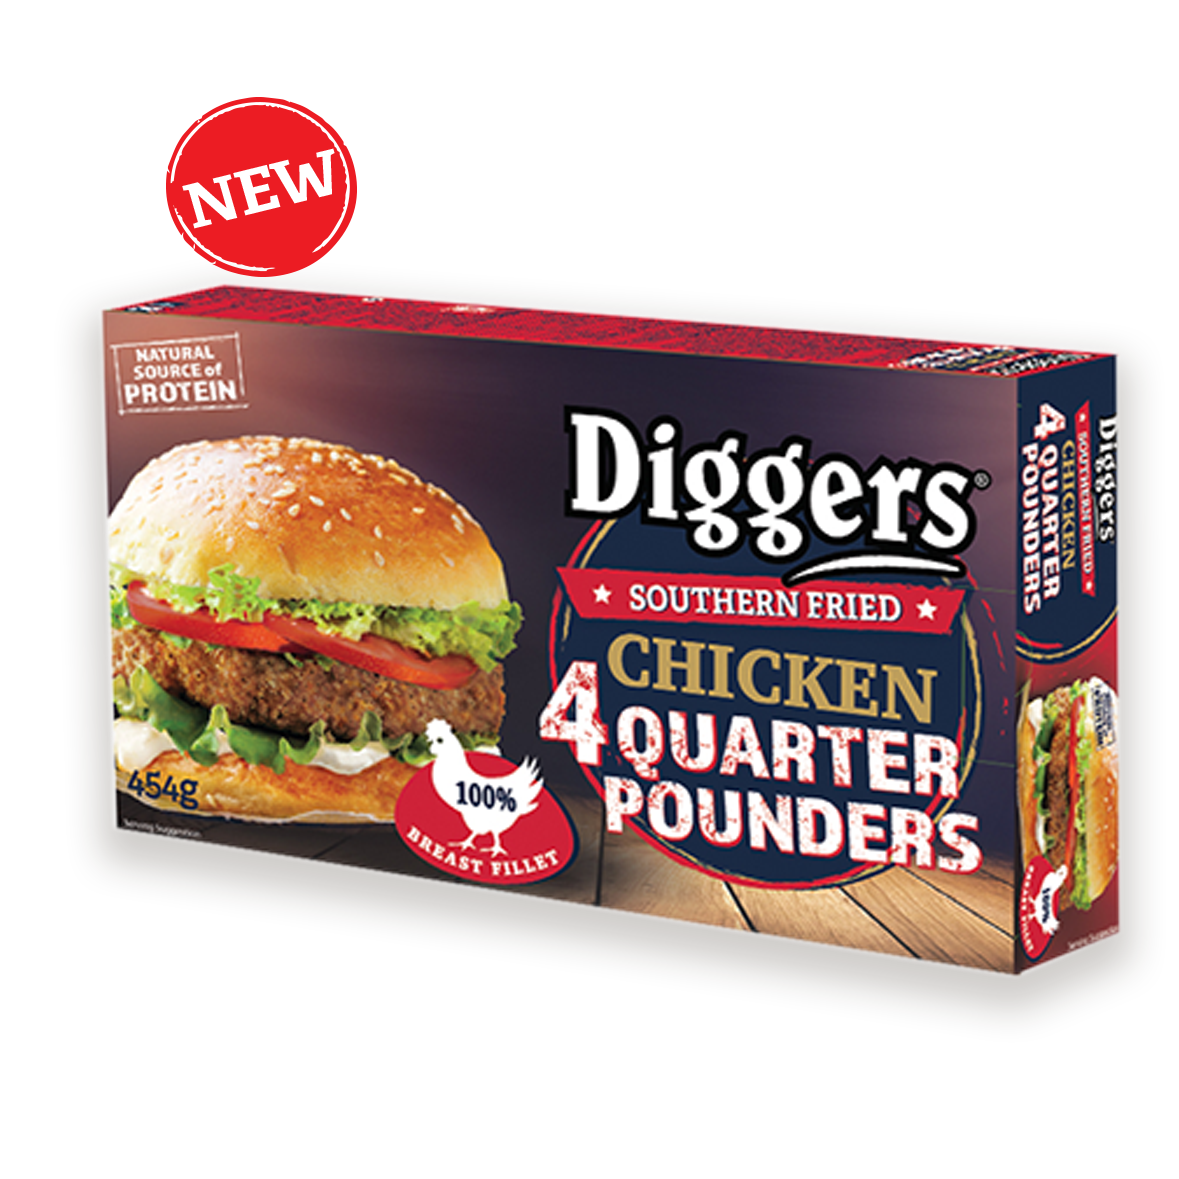 Diggers Southern Fried Chicken Quarter Pounders Burgers